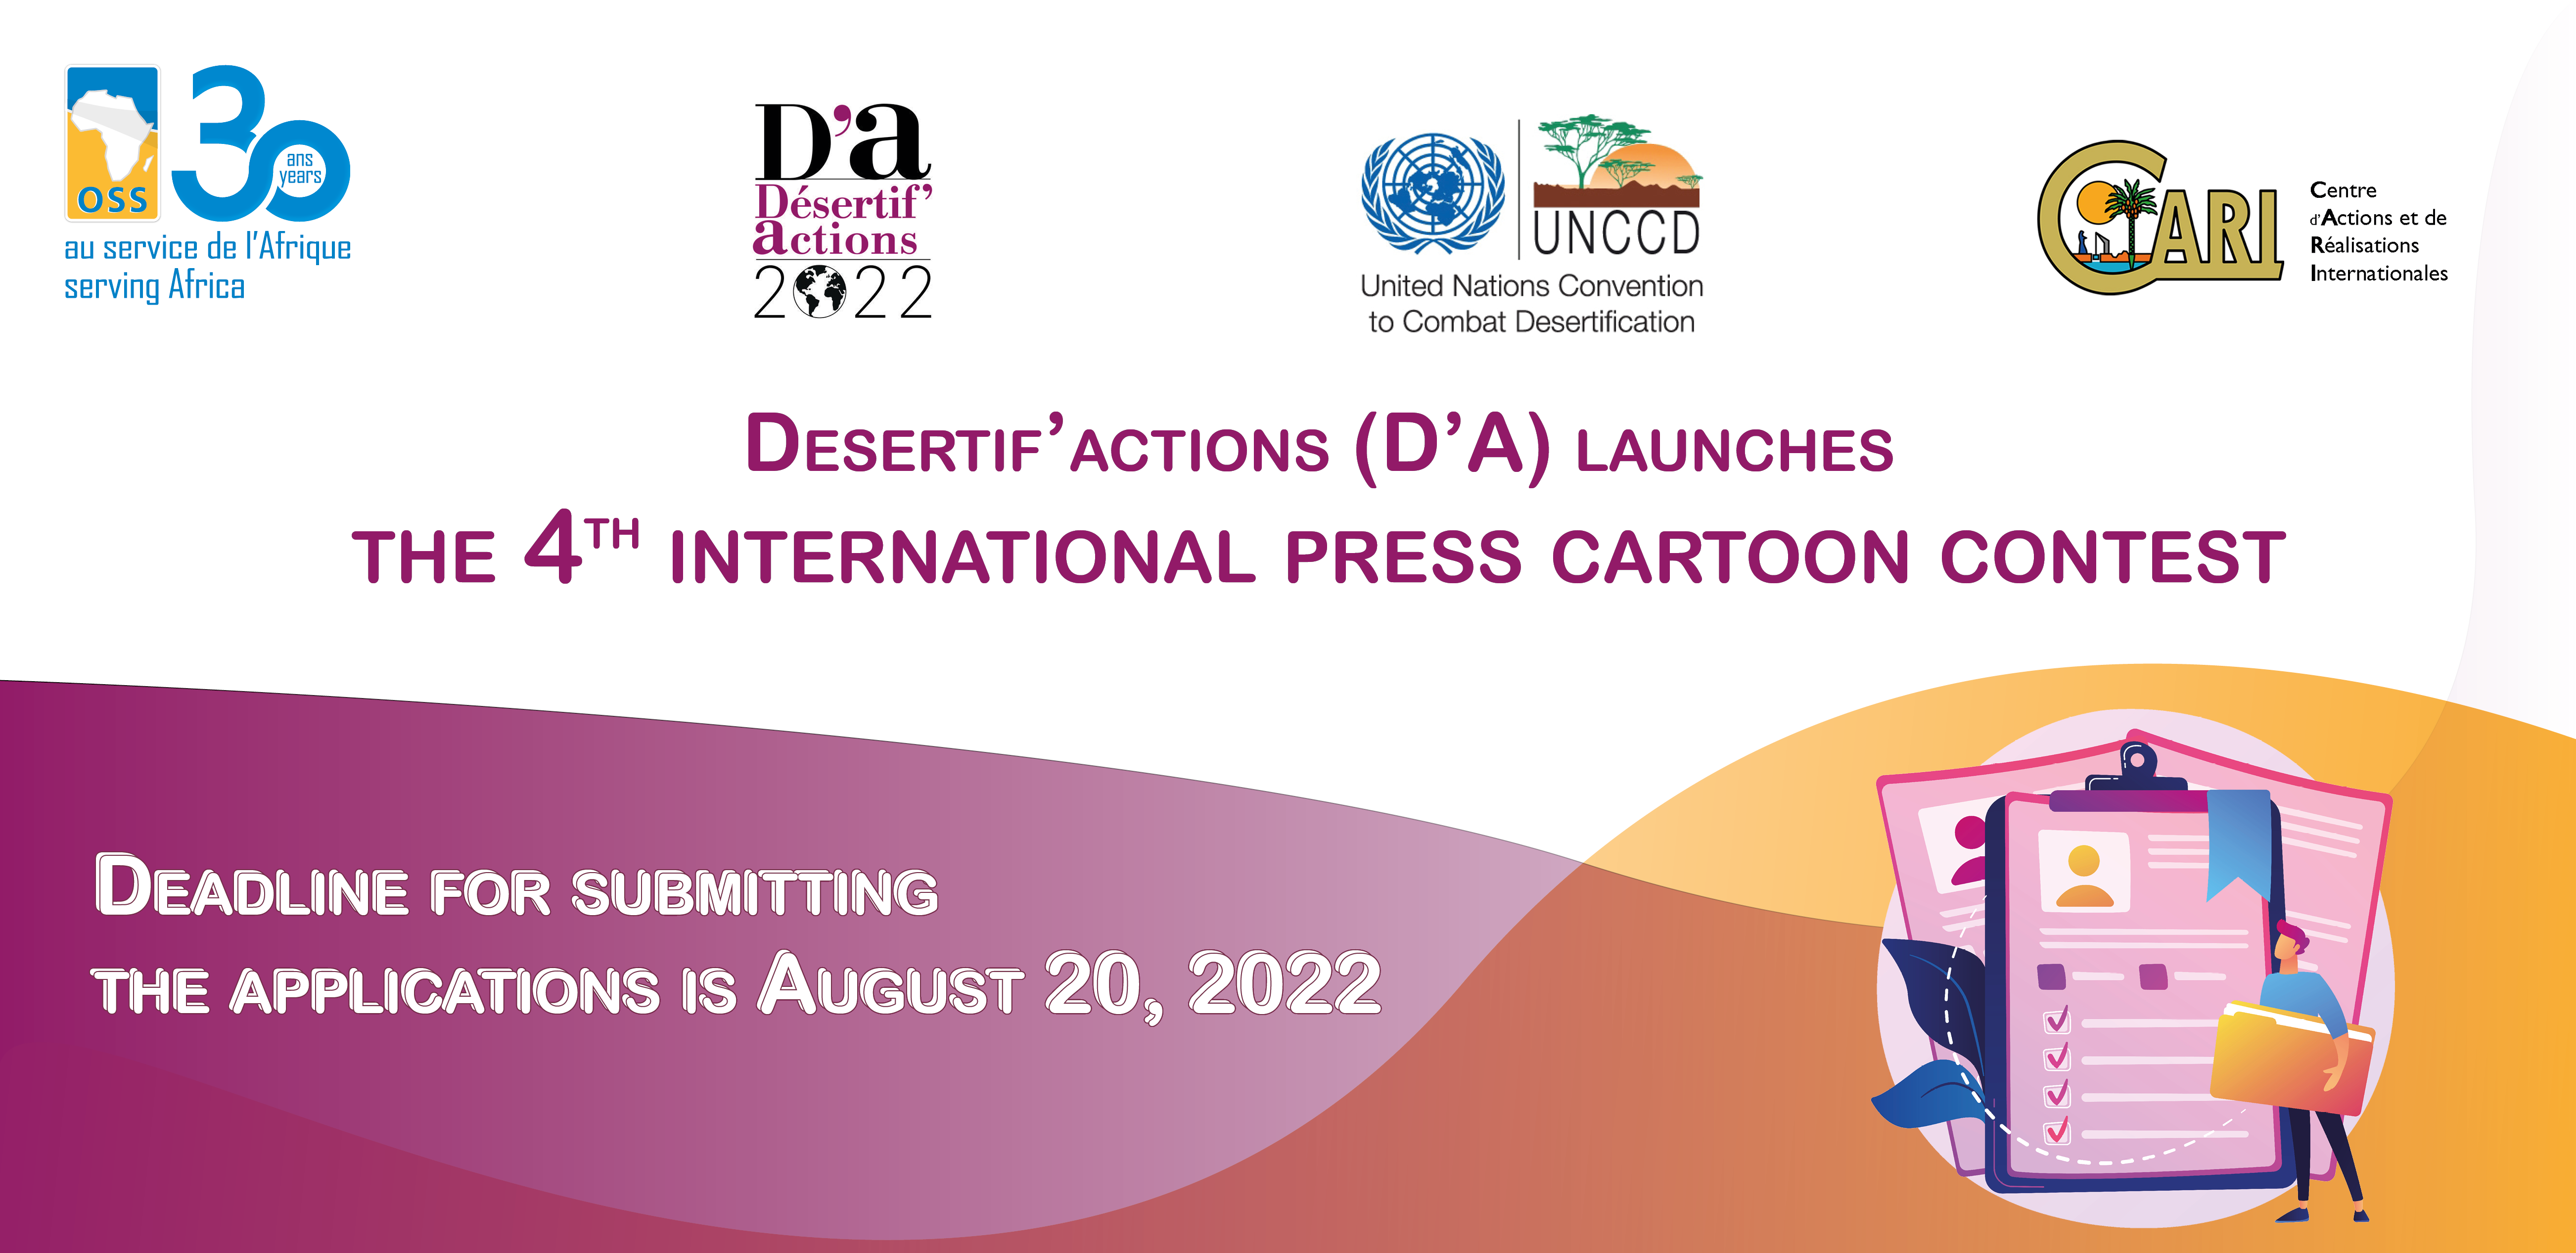 Desertif’actions (D’A) launches the 4th international press cartoon contest. Deadline for submitting the applications is August 20, 2022.